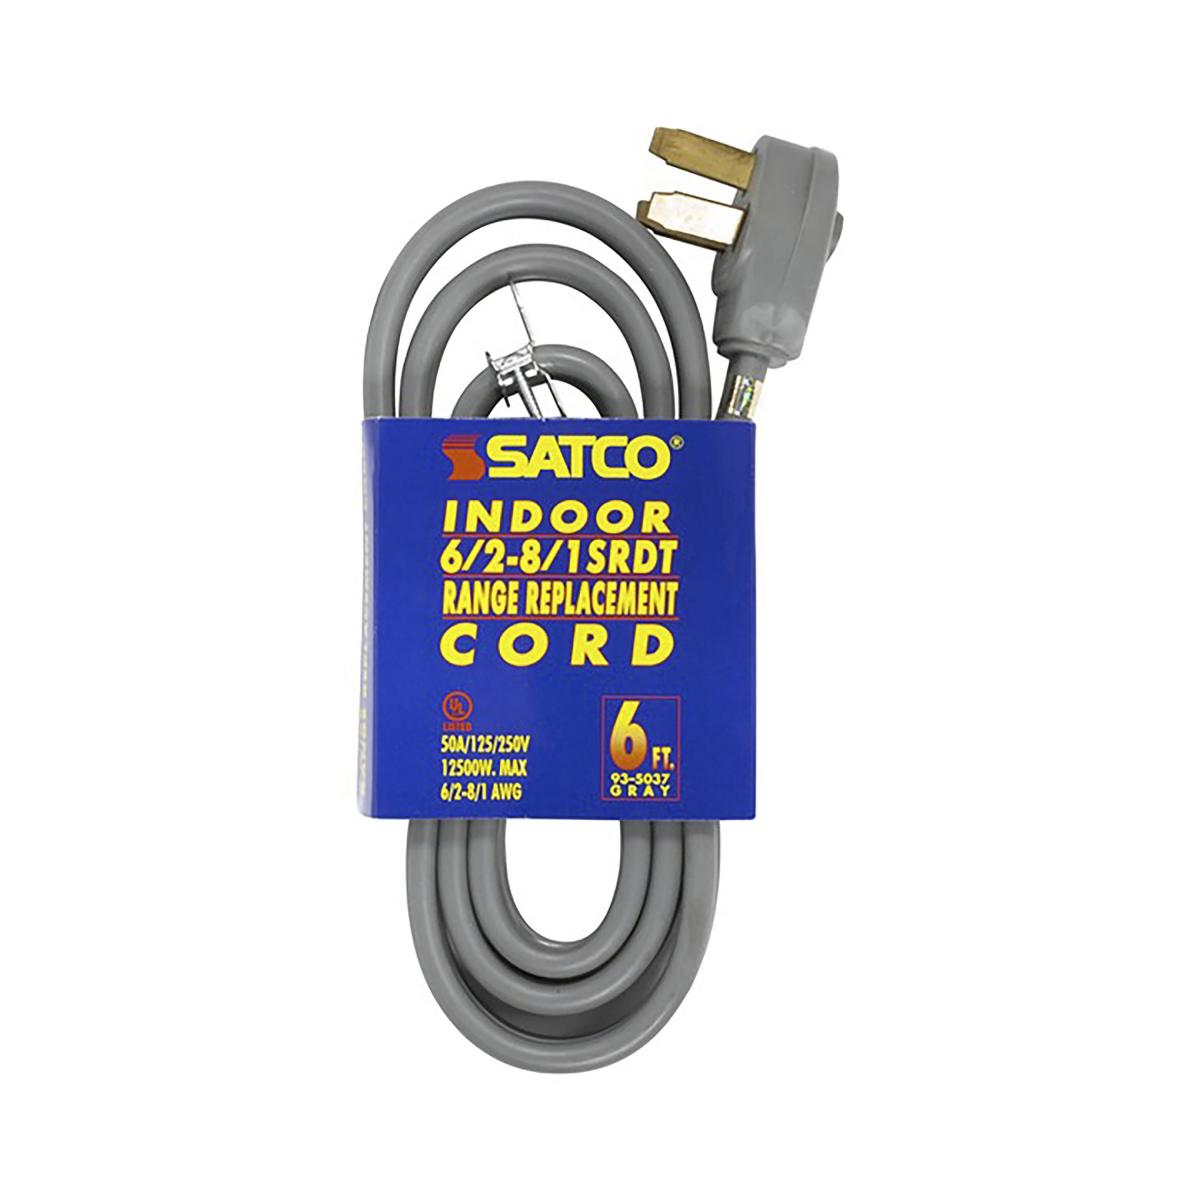 Satco 93-5037 6 Foot, 3 Wire Heavy Duty Replacement Range Cord 6-2 - 8-1 SRDT Gray Flat Indoor Use Only 50A/125V-250V 12500W